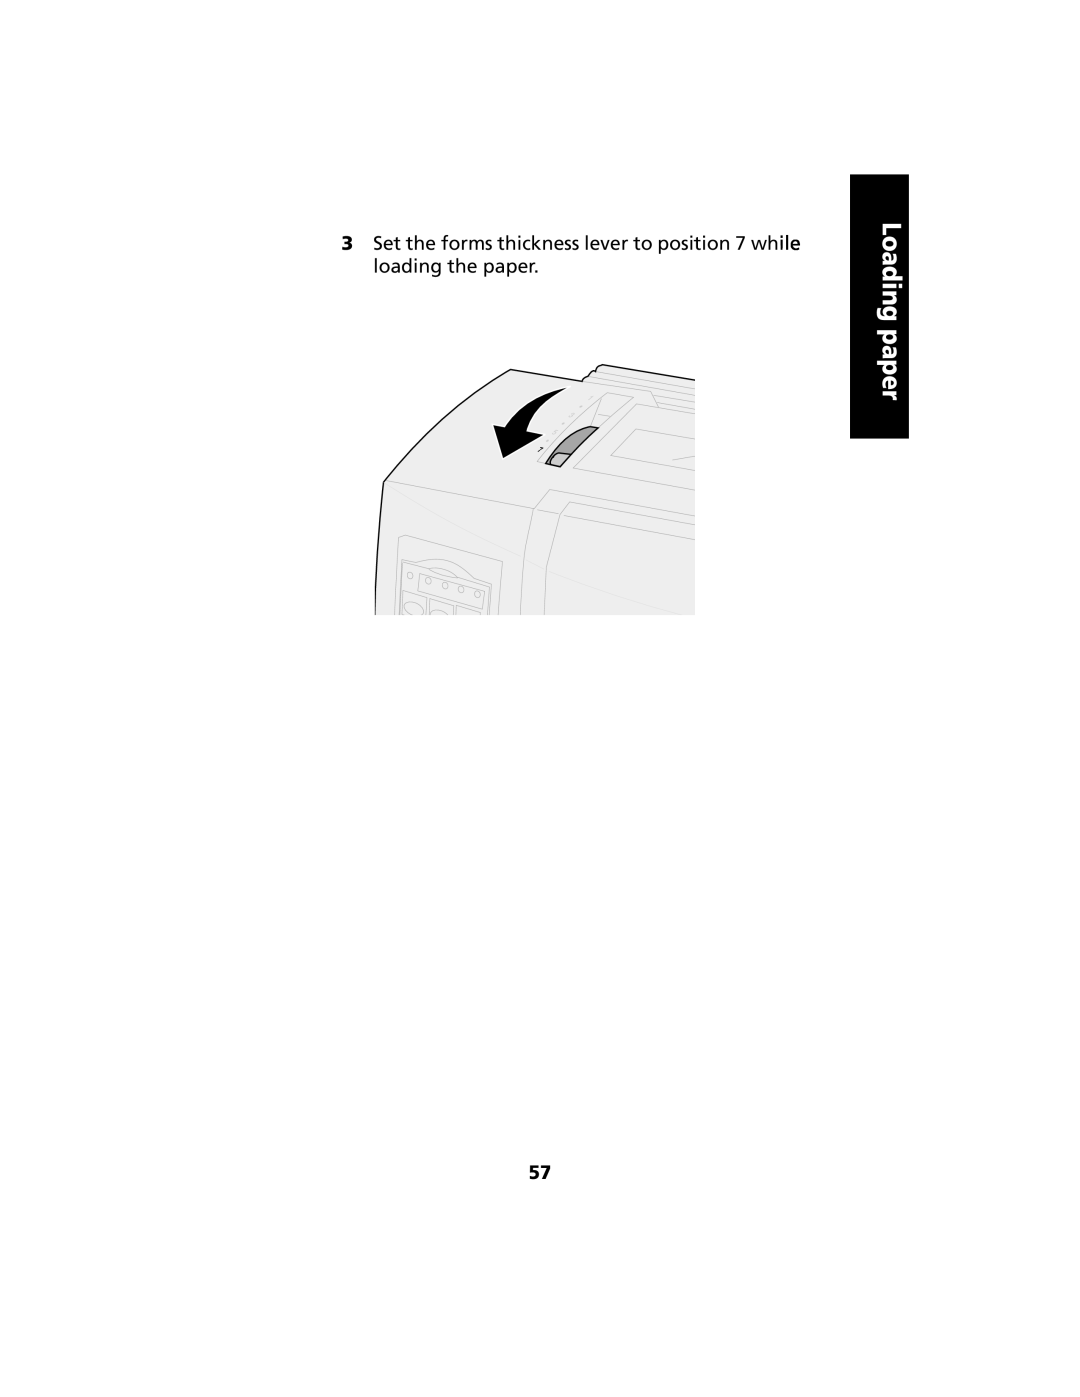 Lexmark 2480 manual Loading paper, Set the forms thickness lever to position 7 while loading the paper 